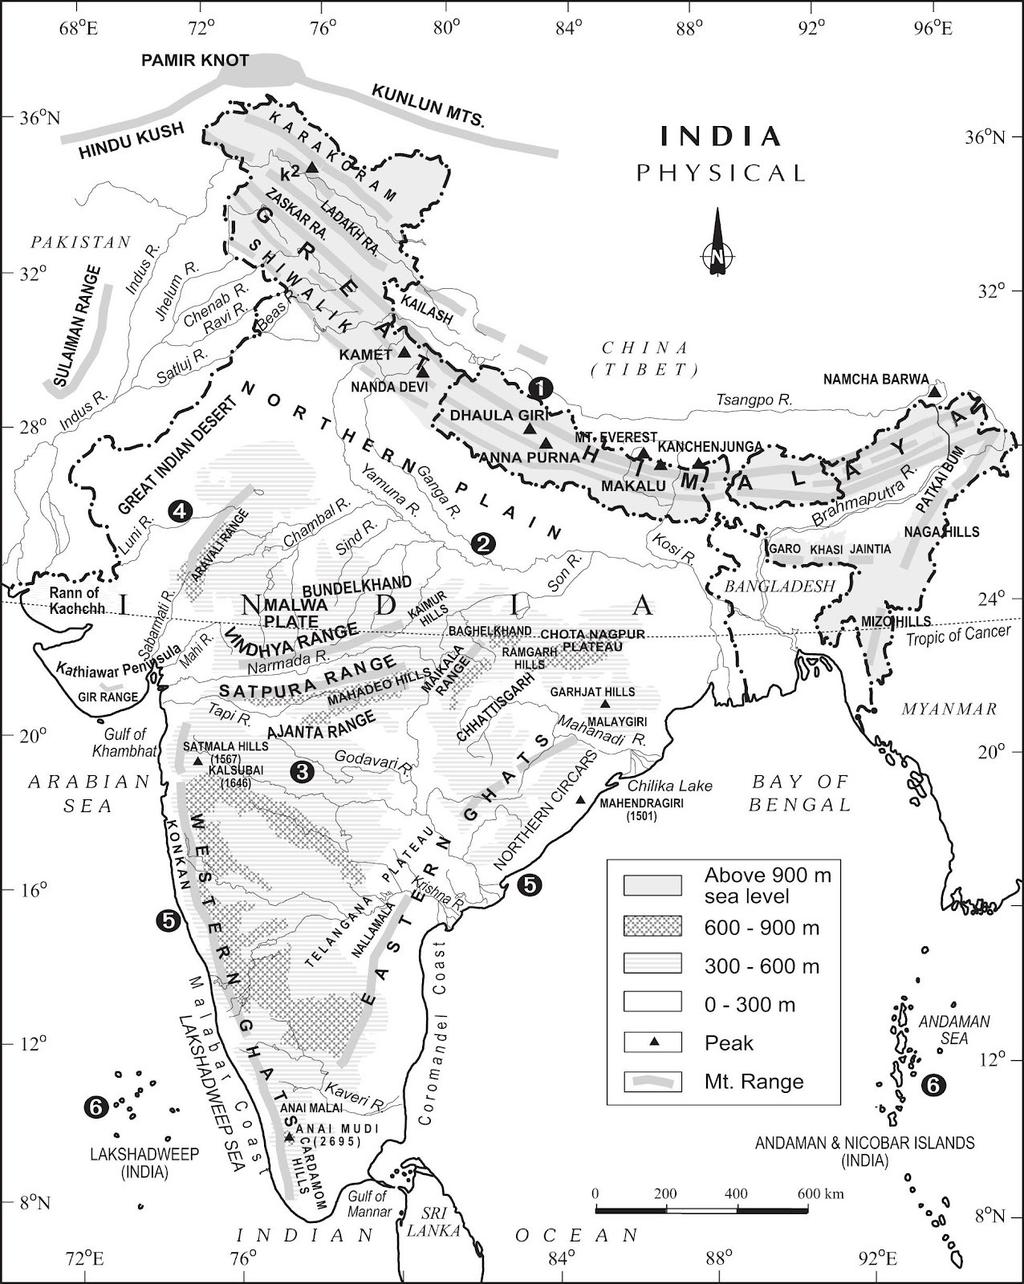 ON INDIAN GEOGRAPHY - 1 INDIA 1. In the north, it is bound by the lofty Himalayas. 2. The Arabian Sea in the west 3. The Bay of Bengal in the east and the Indian Ocean in the south 4.